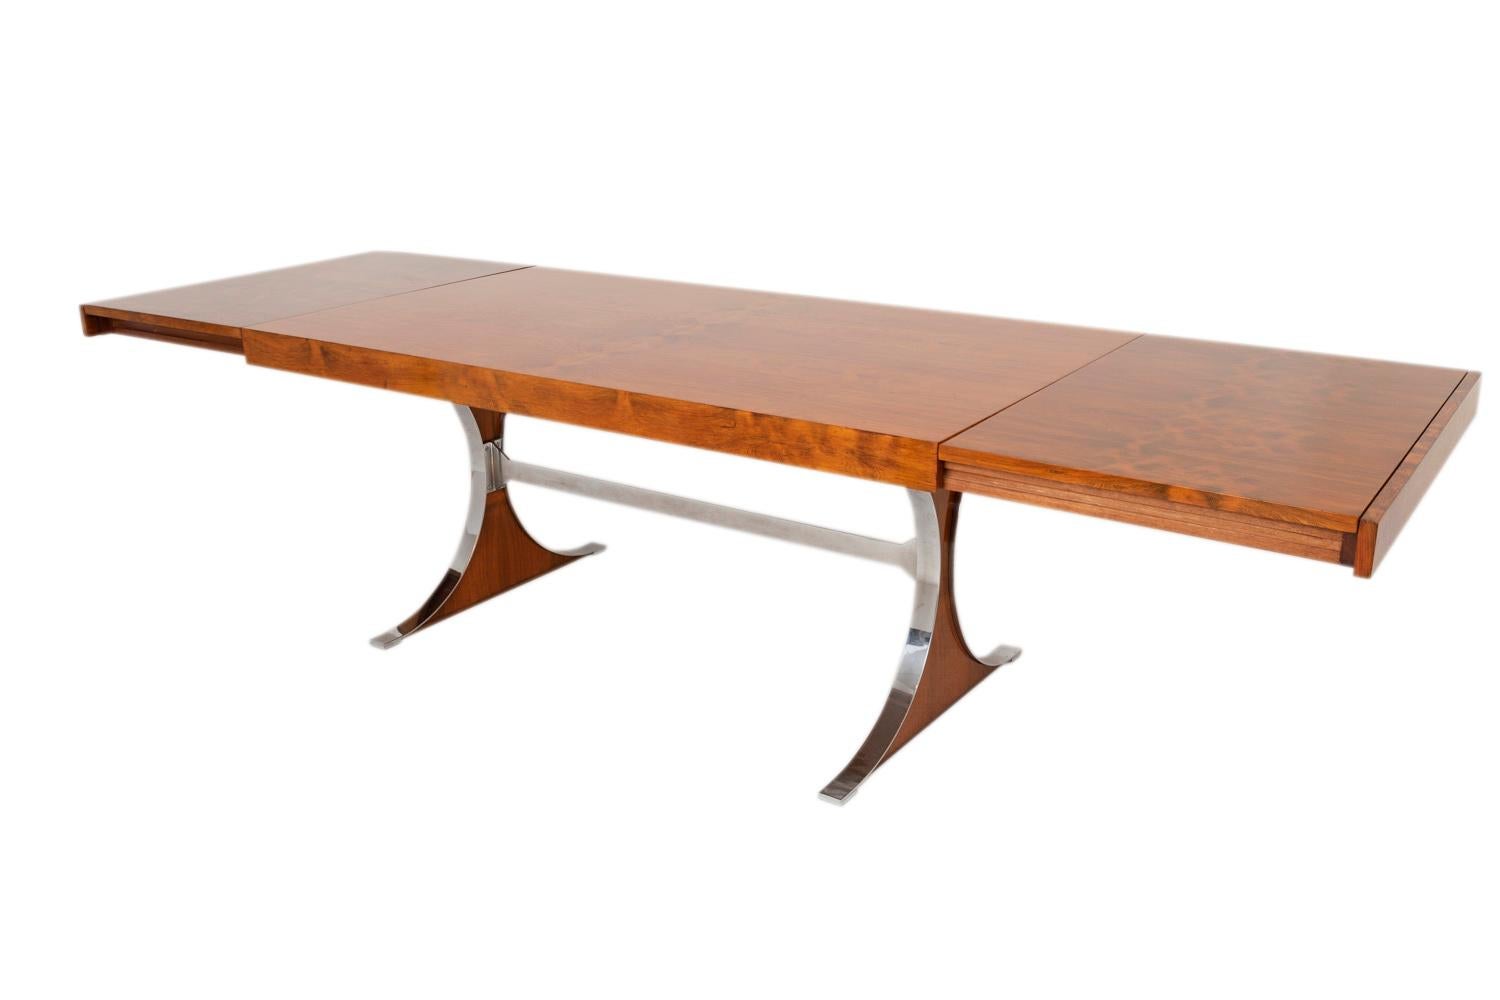 R.-J. Caillette, attributed to.
Rectangular table, “Sylvie” model, in veneered rosewood standing on two diabolo feet partially covered with stainless steel and joined by a stretcher in the same material. Large tray ending with a drawer at each side,